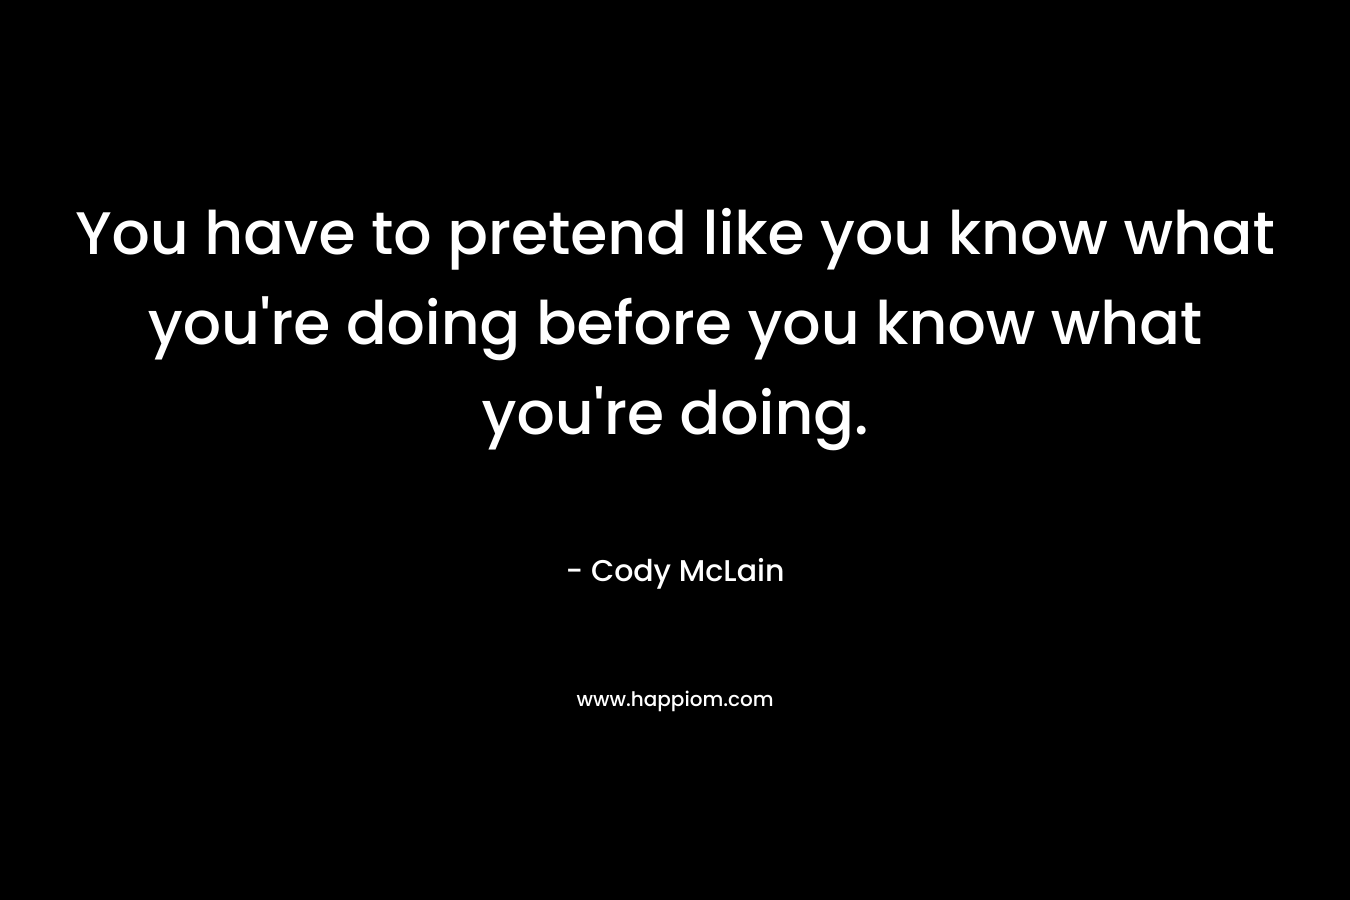 You have to pretend like you know what you're doing before you know what you're doing.